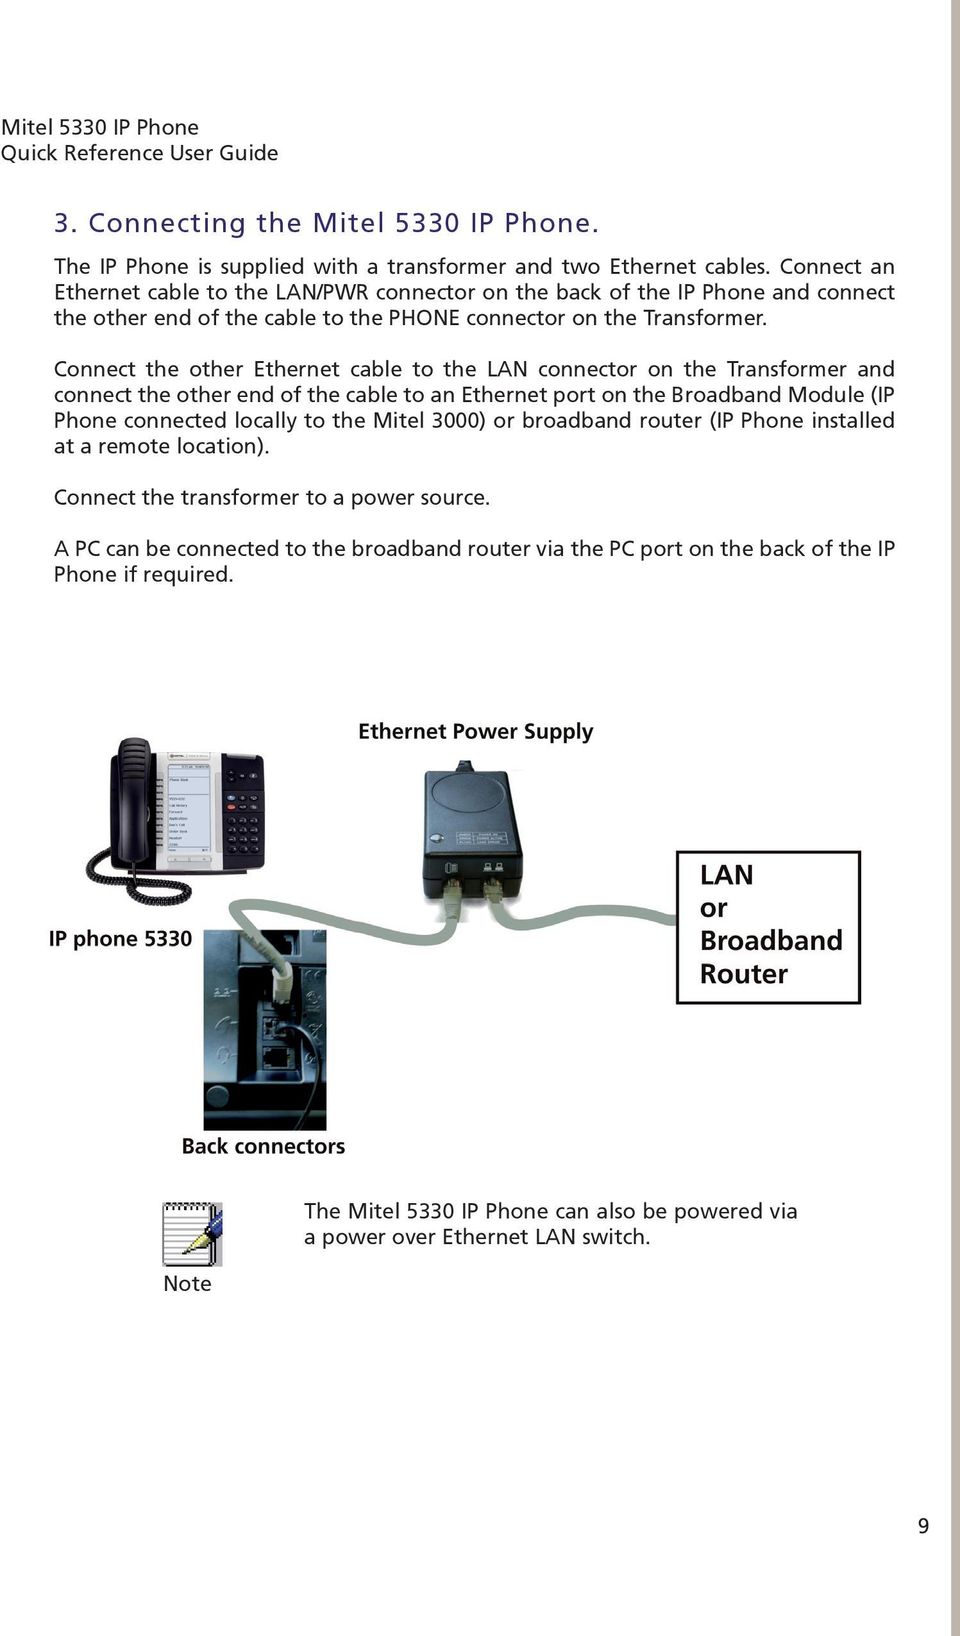 Connect the other Ethernet cable to the LAN connector on the Transformer and connect the other end of the cable to an Ethernet port on the Broadband Module (IP Phone connected locally to the